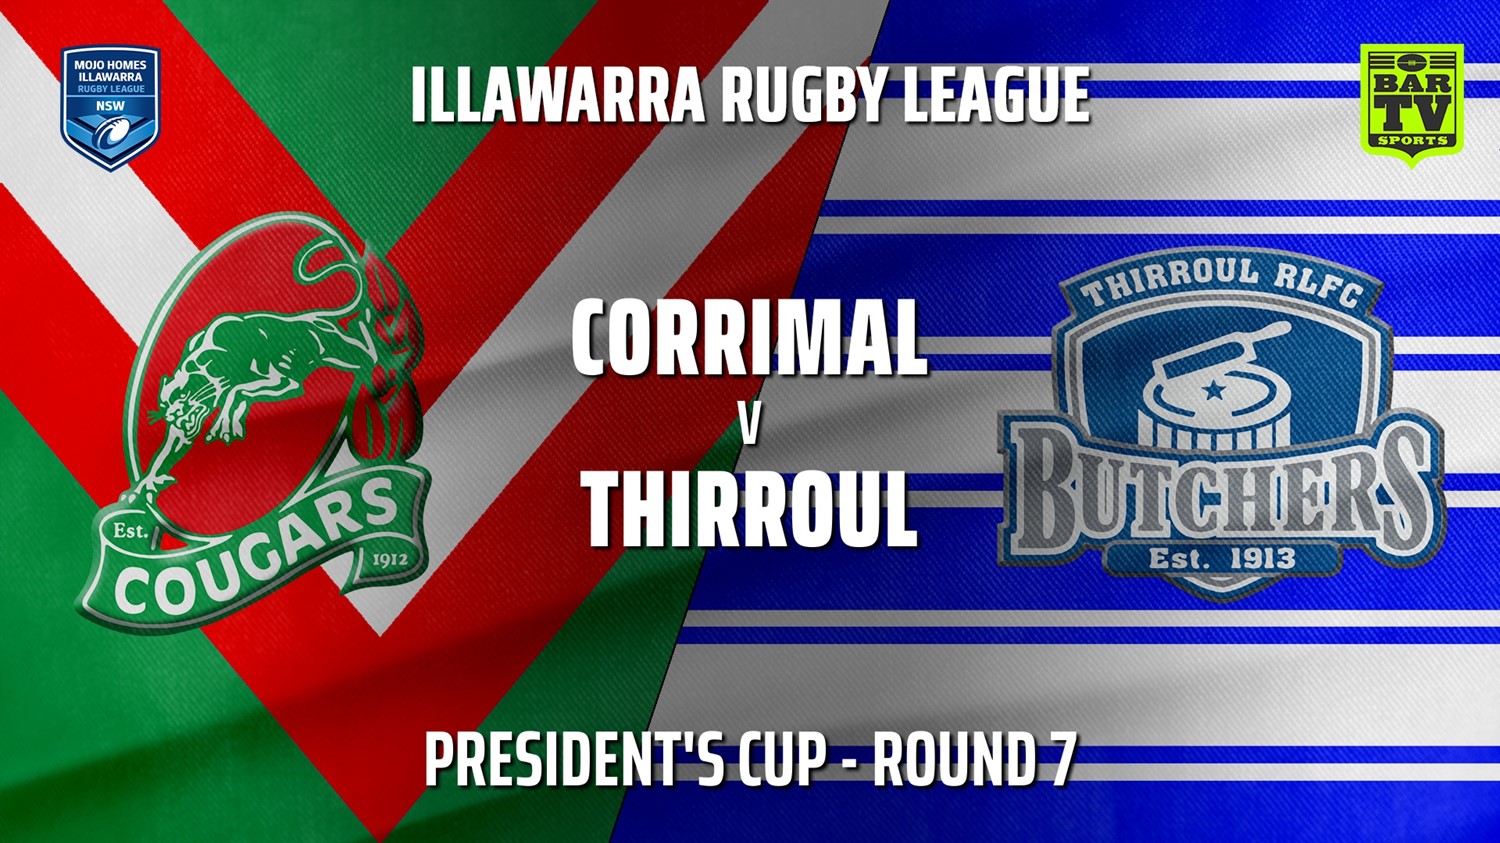 210529-IRL Round 7 - President's Cup - Corrimal Cougars v Thirroul Butchers Minigame Slate Image